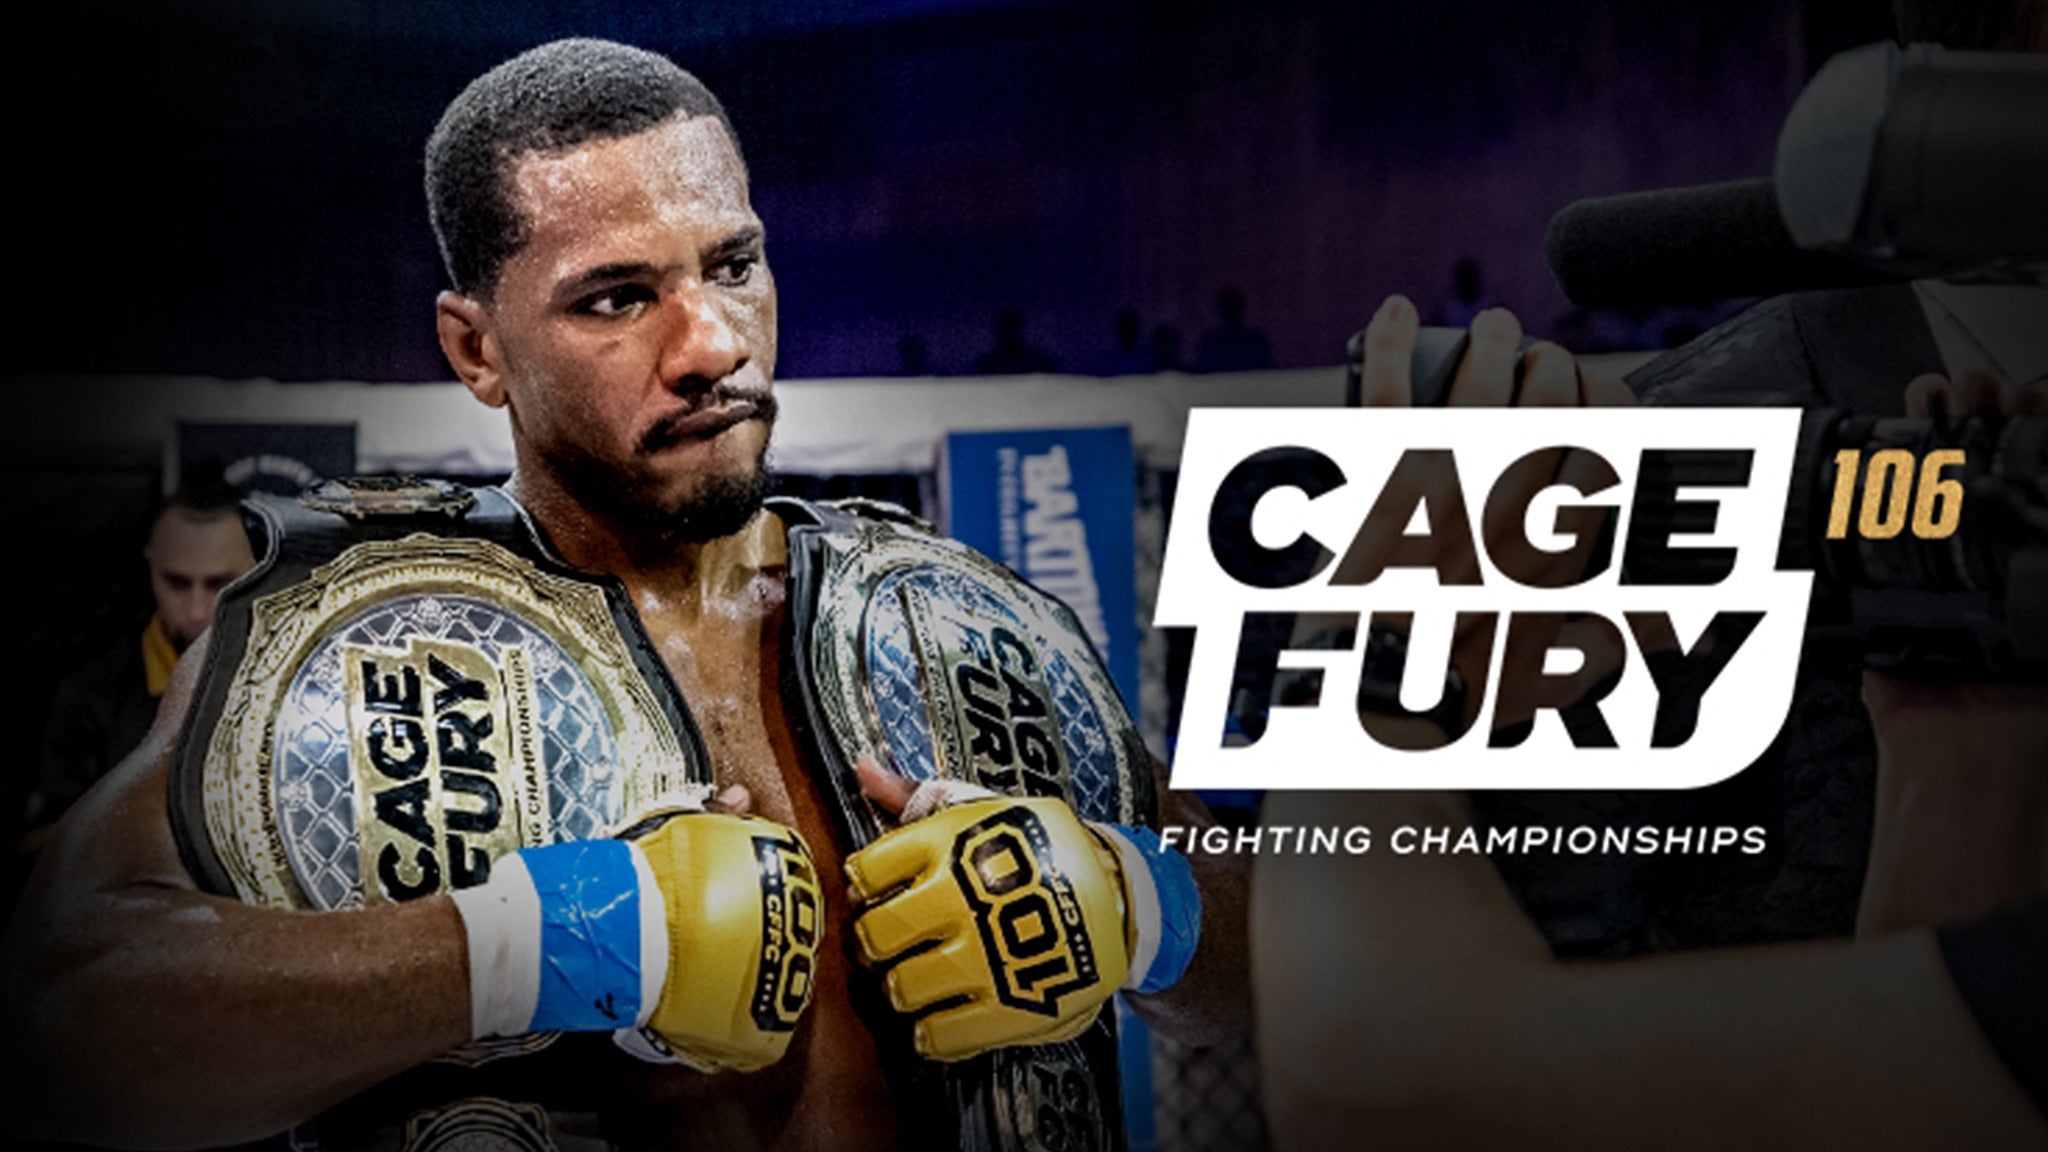 Cage Fury Fighting Championships 114 presale password for approved tickets in Tampa